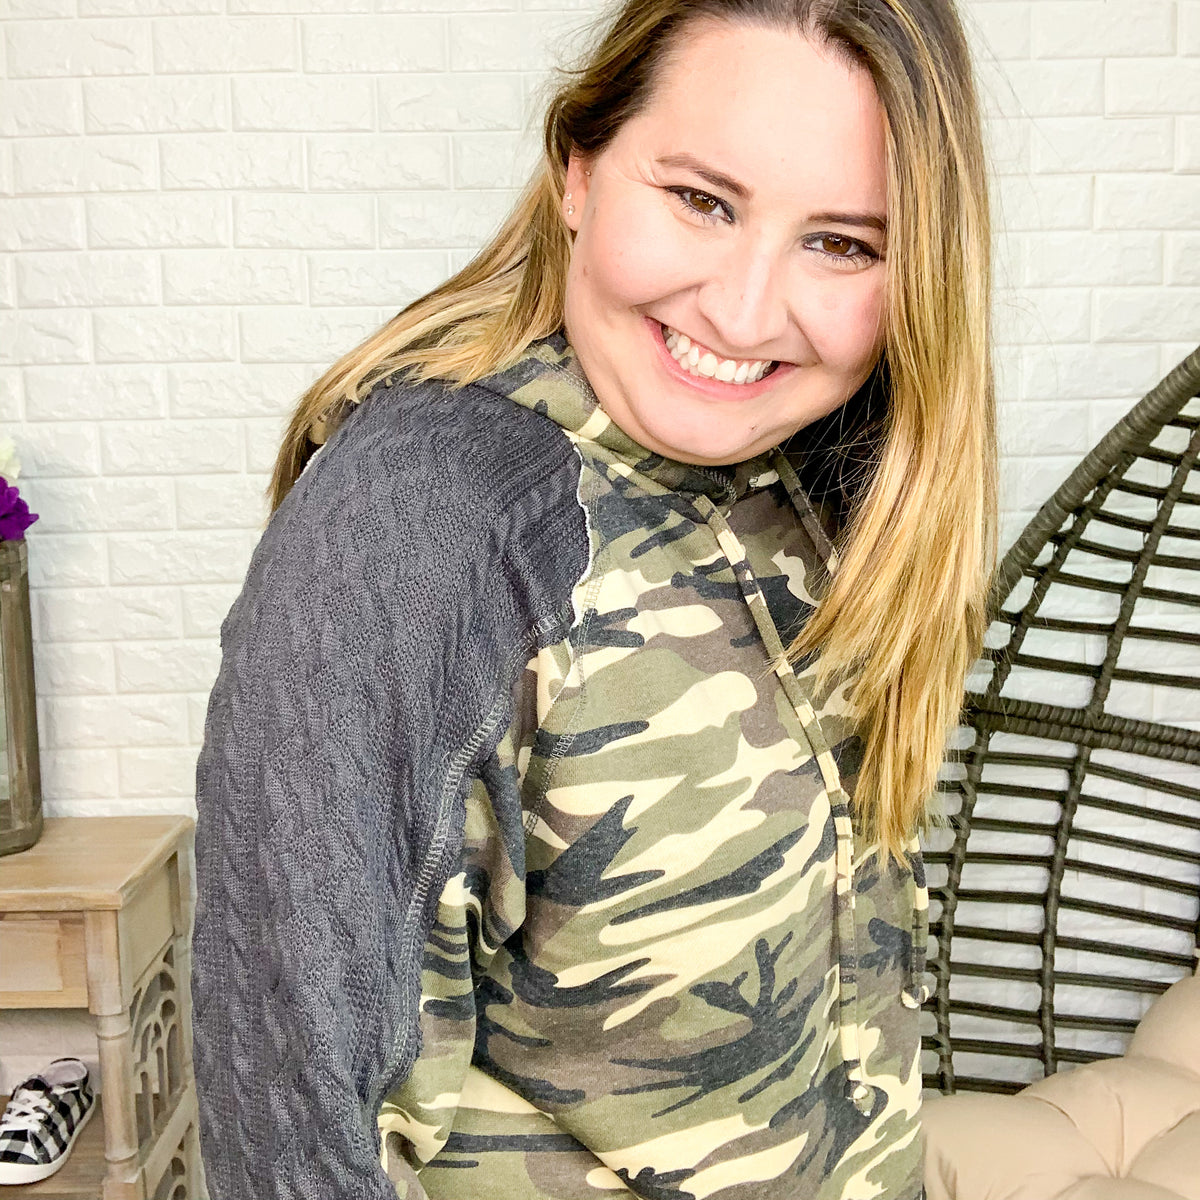 "Are you There" Camo Hoodie with Sweater Sleeves